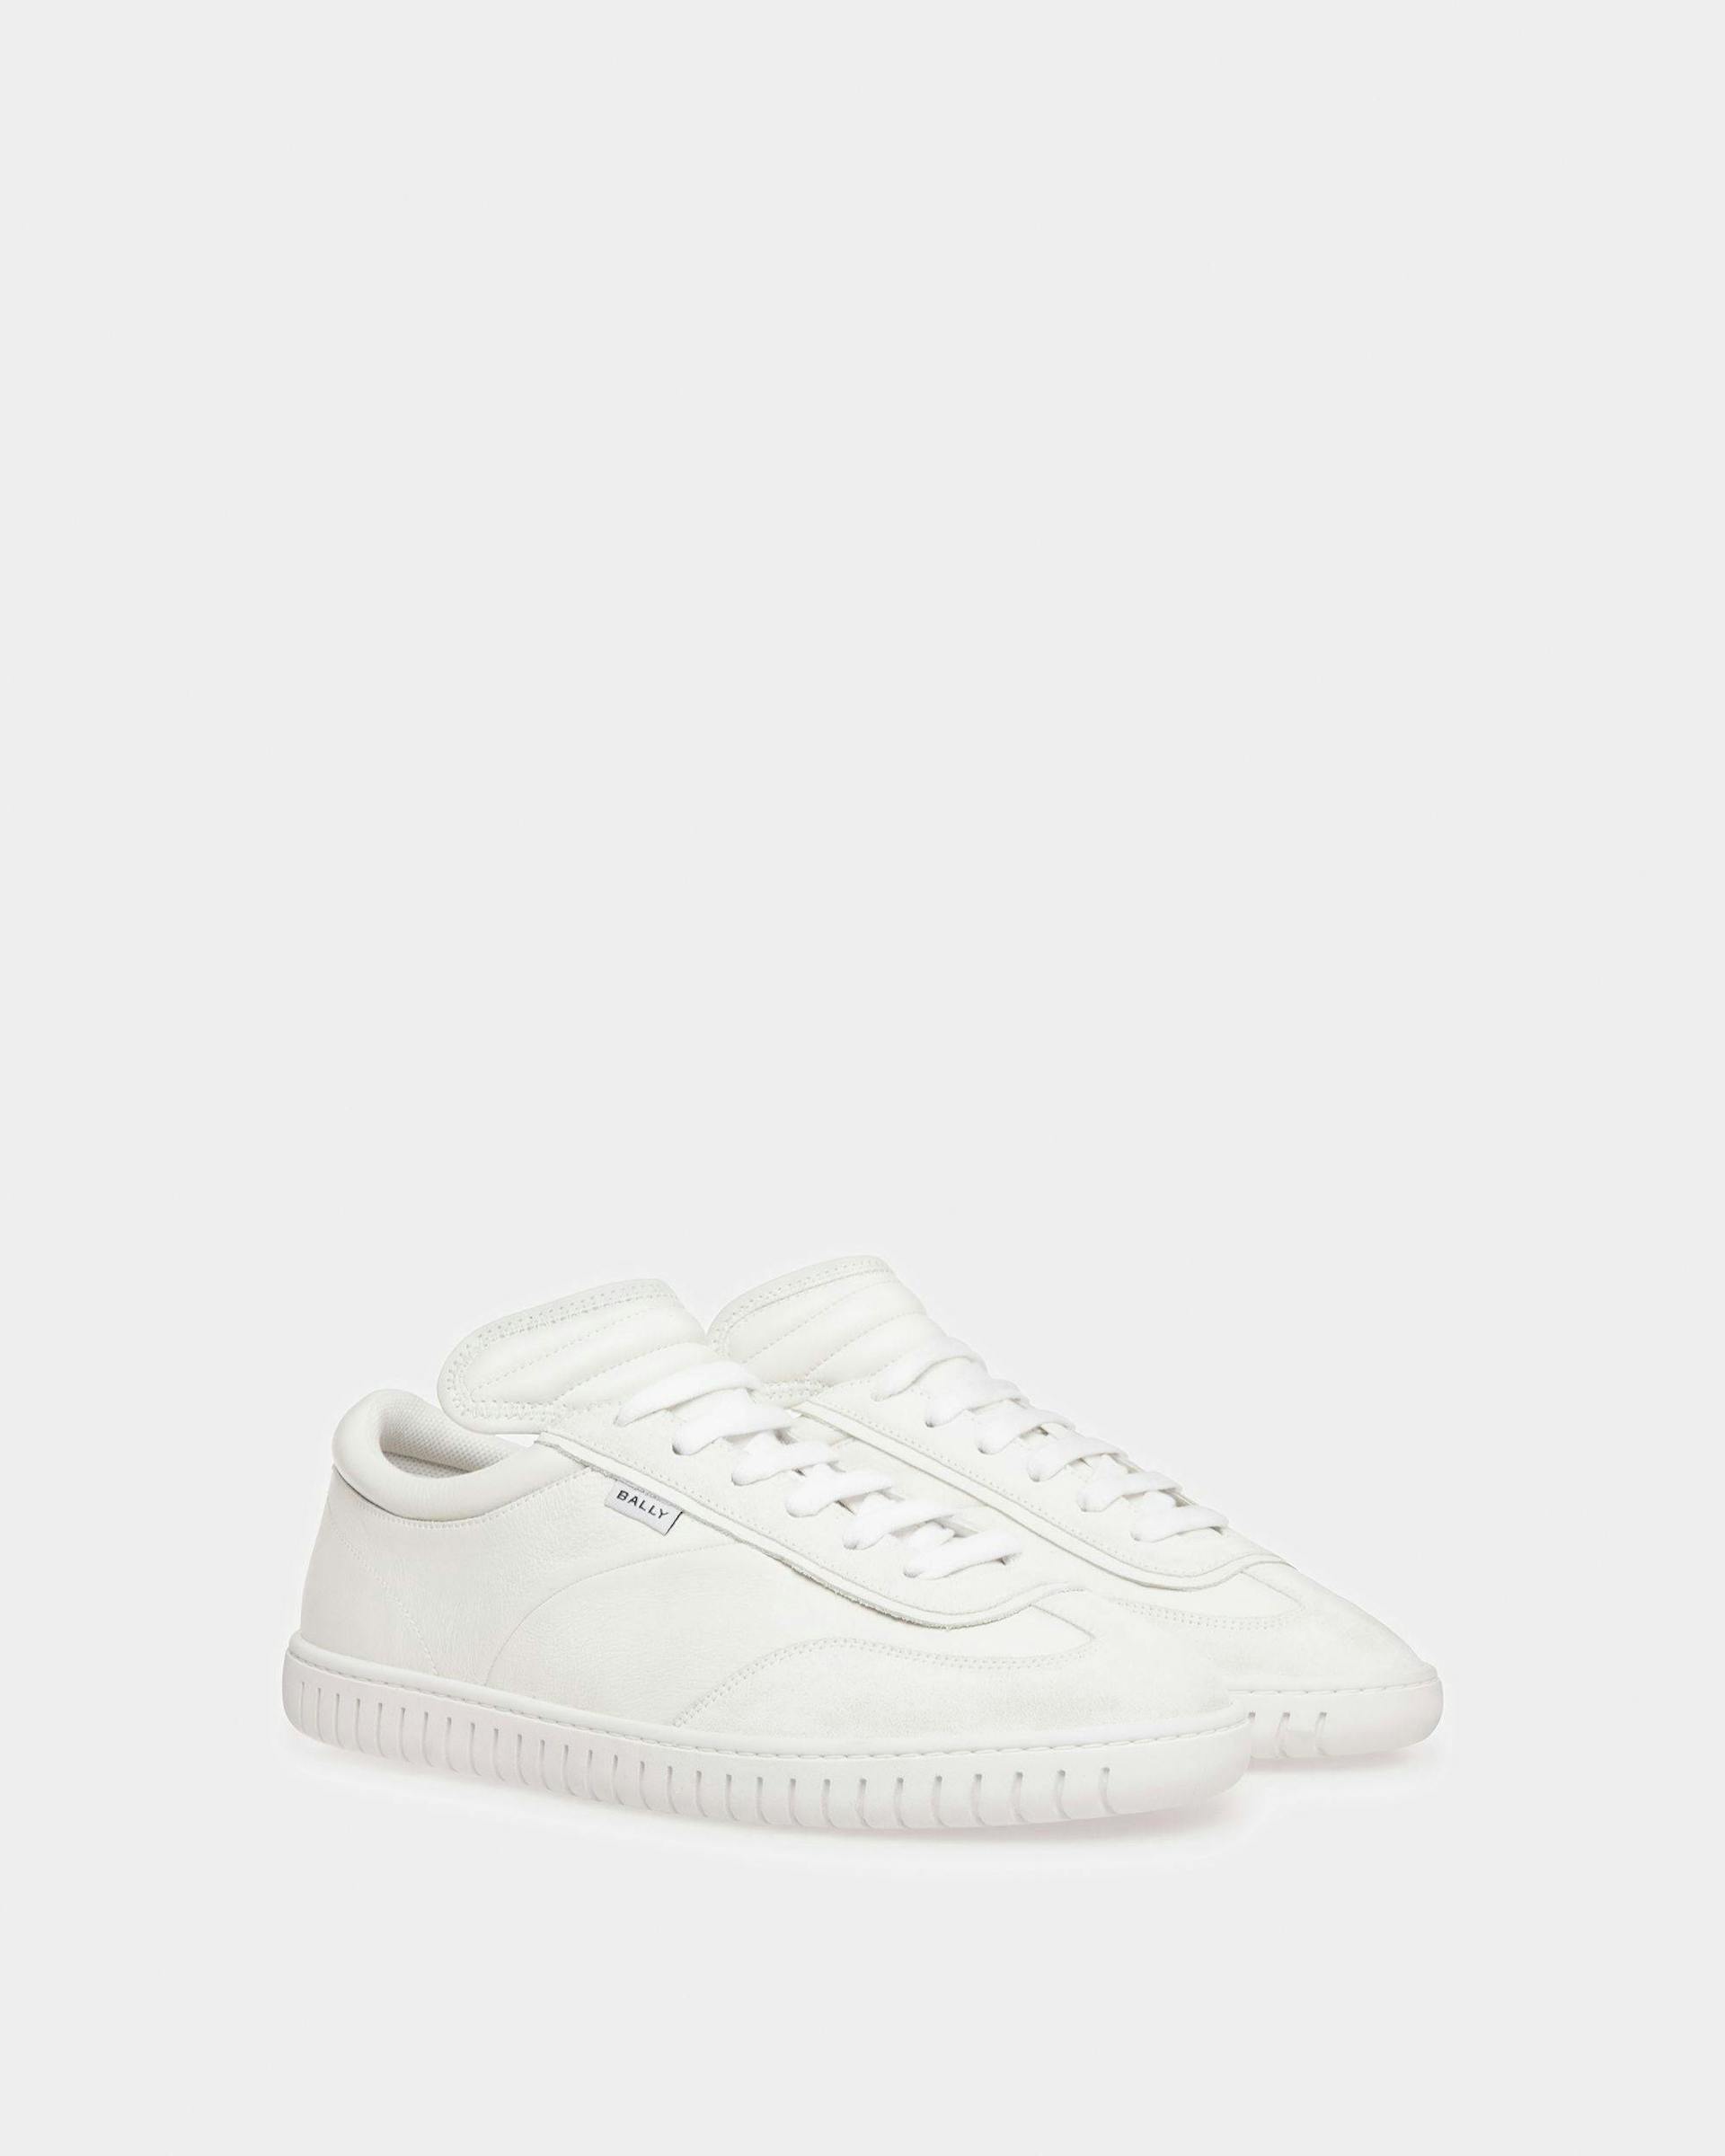 Men's Player Sneakers In White Leather | Bally | Still Life 3/4 Front